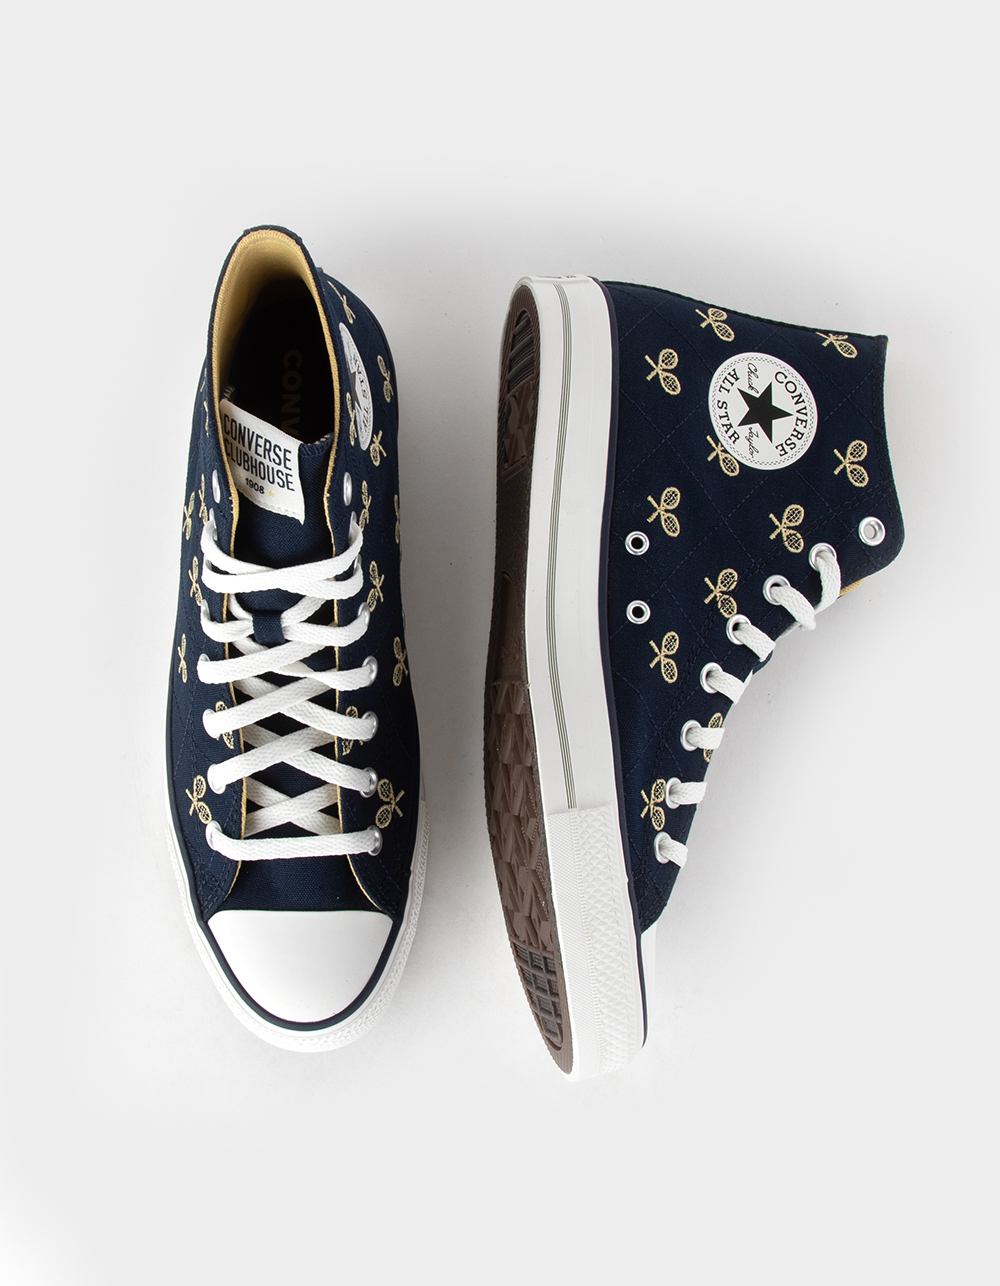 CONVERSE Chuck Taylor All Star Clubhouse High Top Shoes - NAVY/WHITE ...